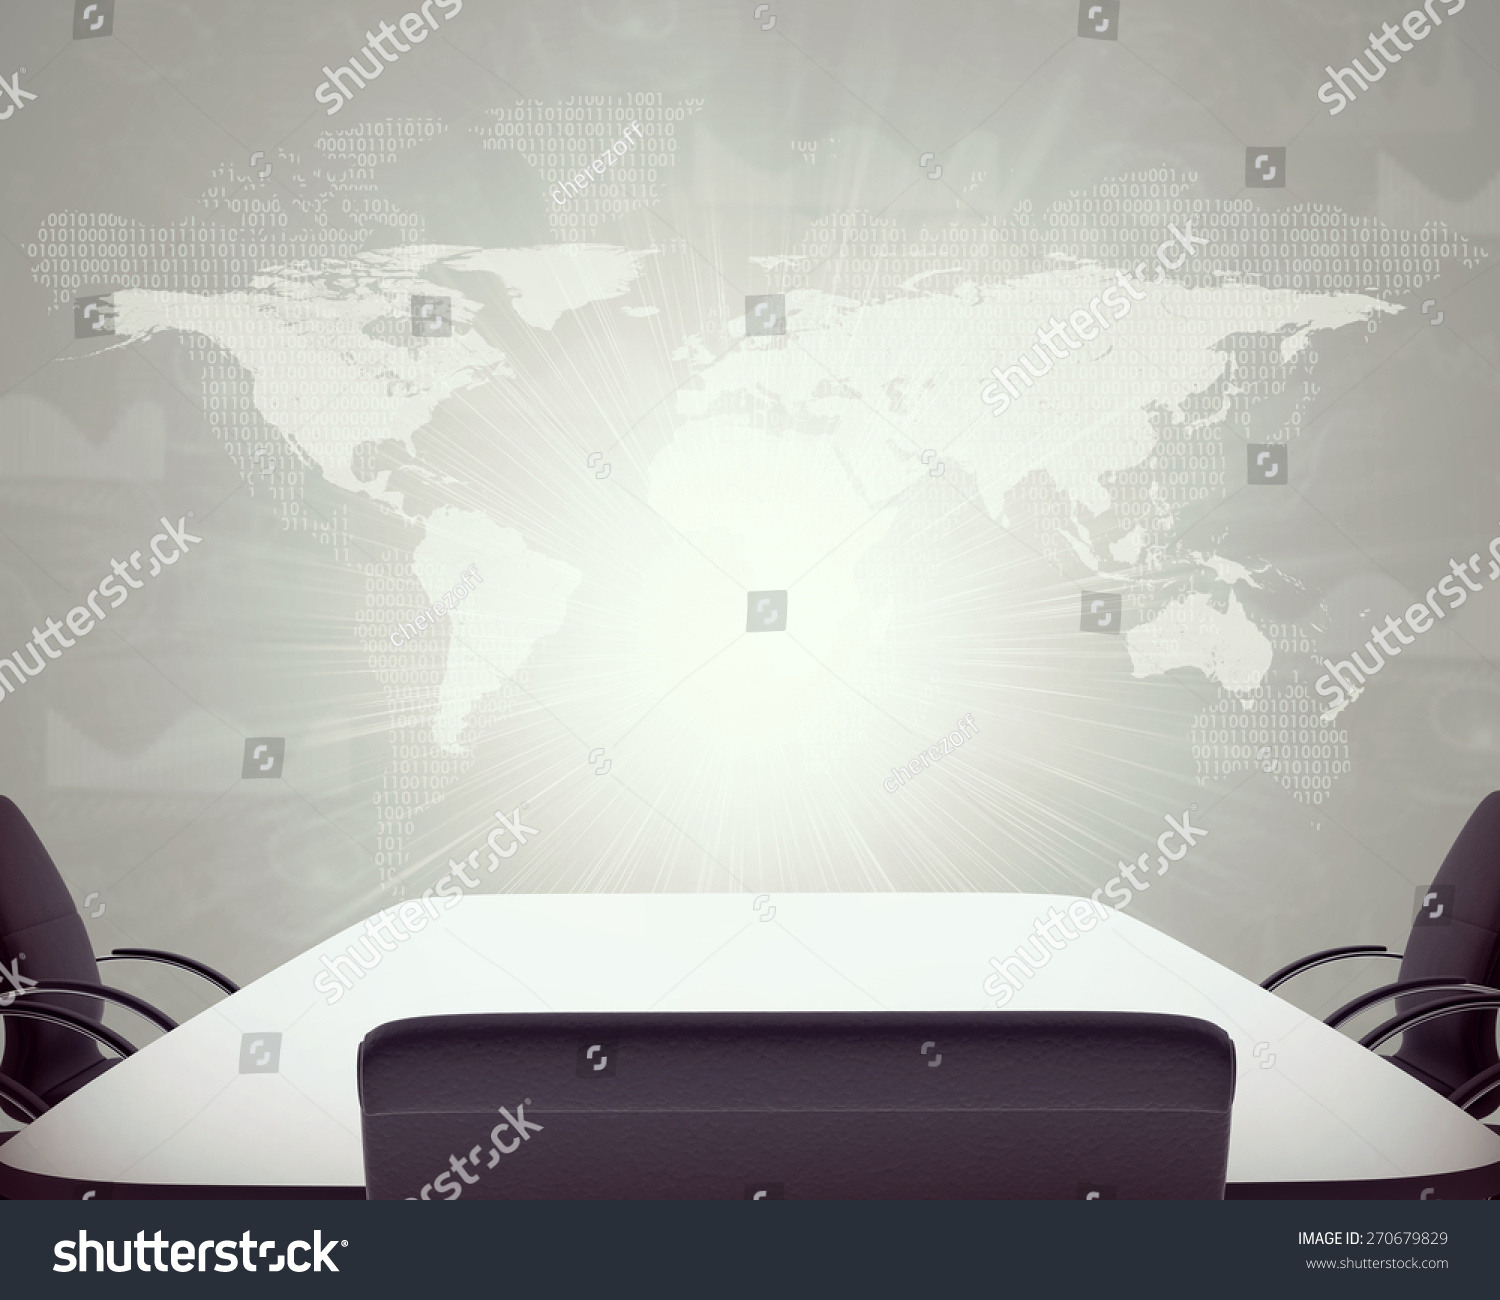 Stock Photo Business Office Table With Chairs World Map As Backdrop 270679829 